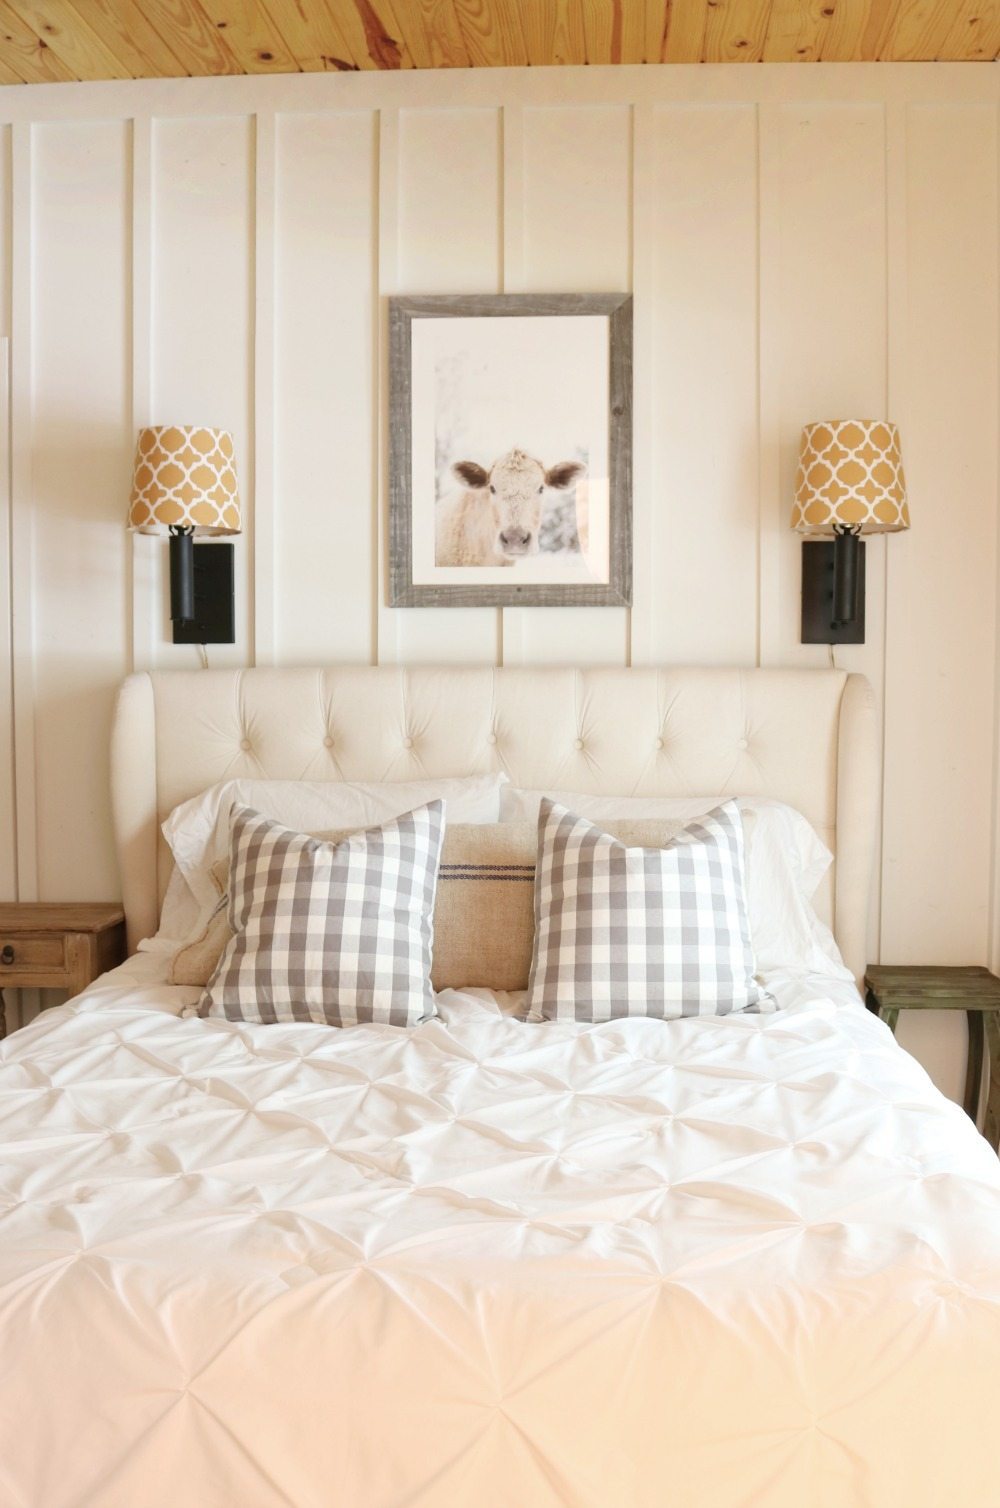 Lamps above the bed in the farmhouse bedroom